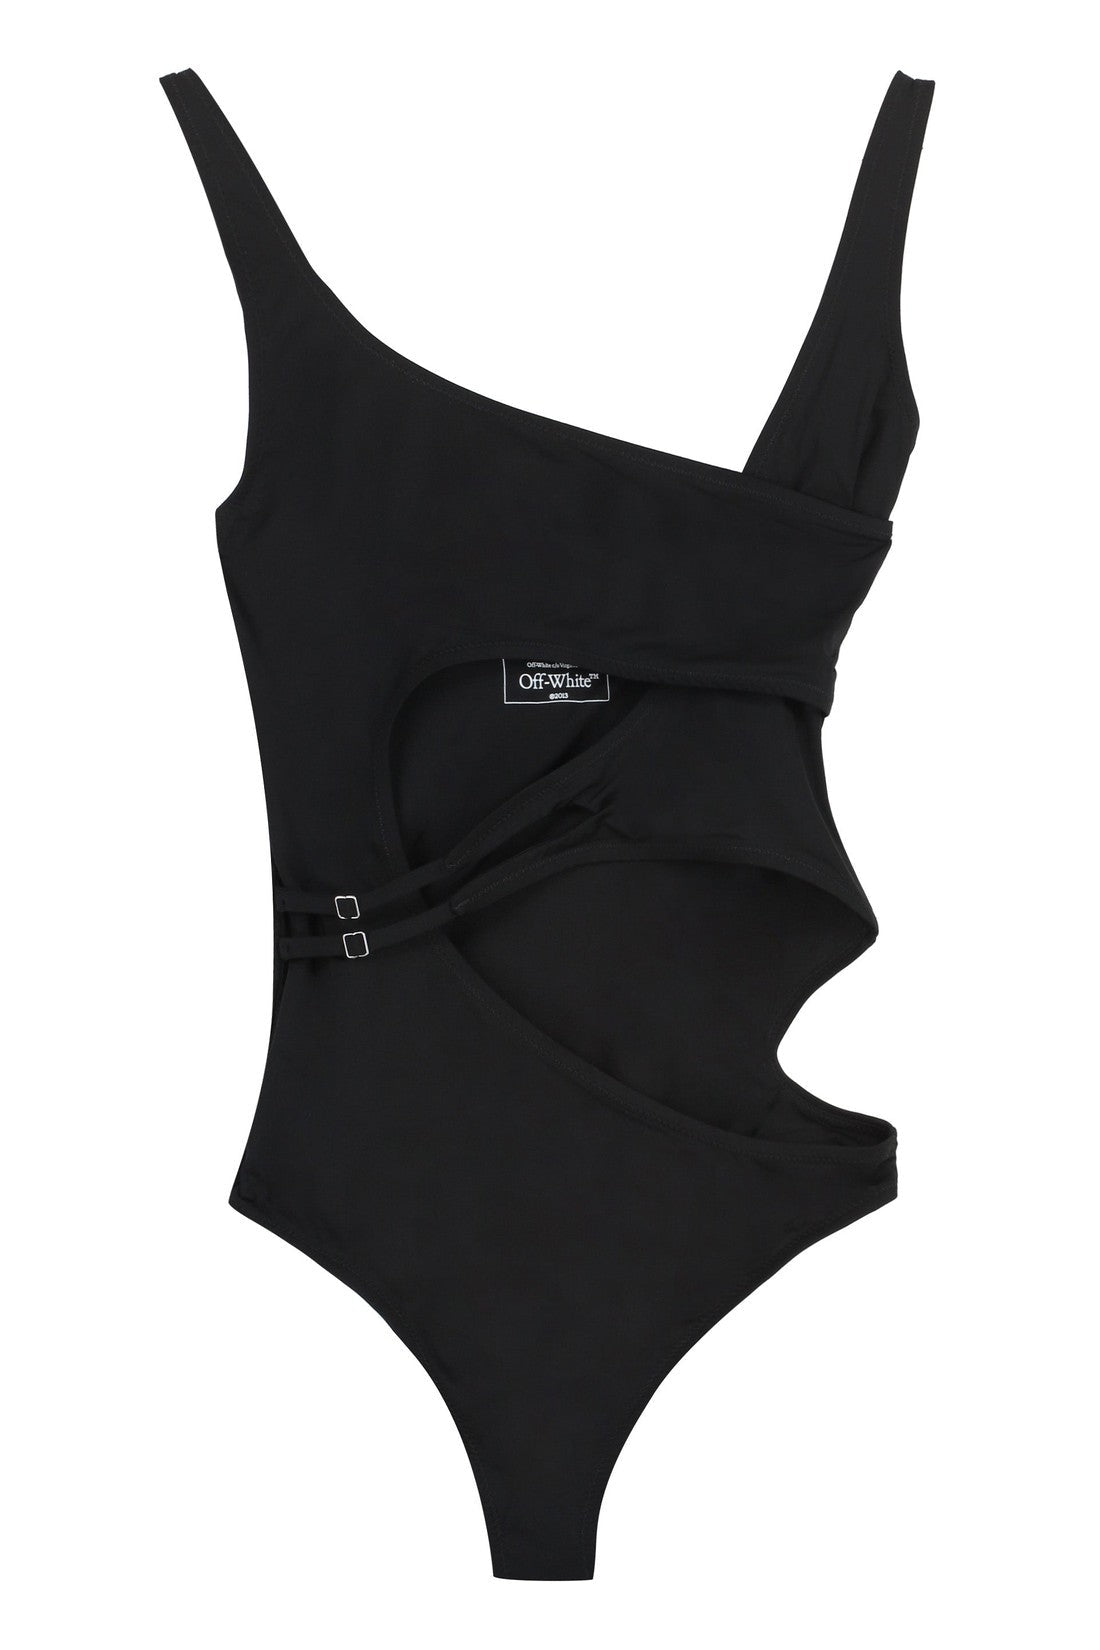 Off-White-OUTLET-SALE-One-piece swimsuit-ARCHIVIST